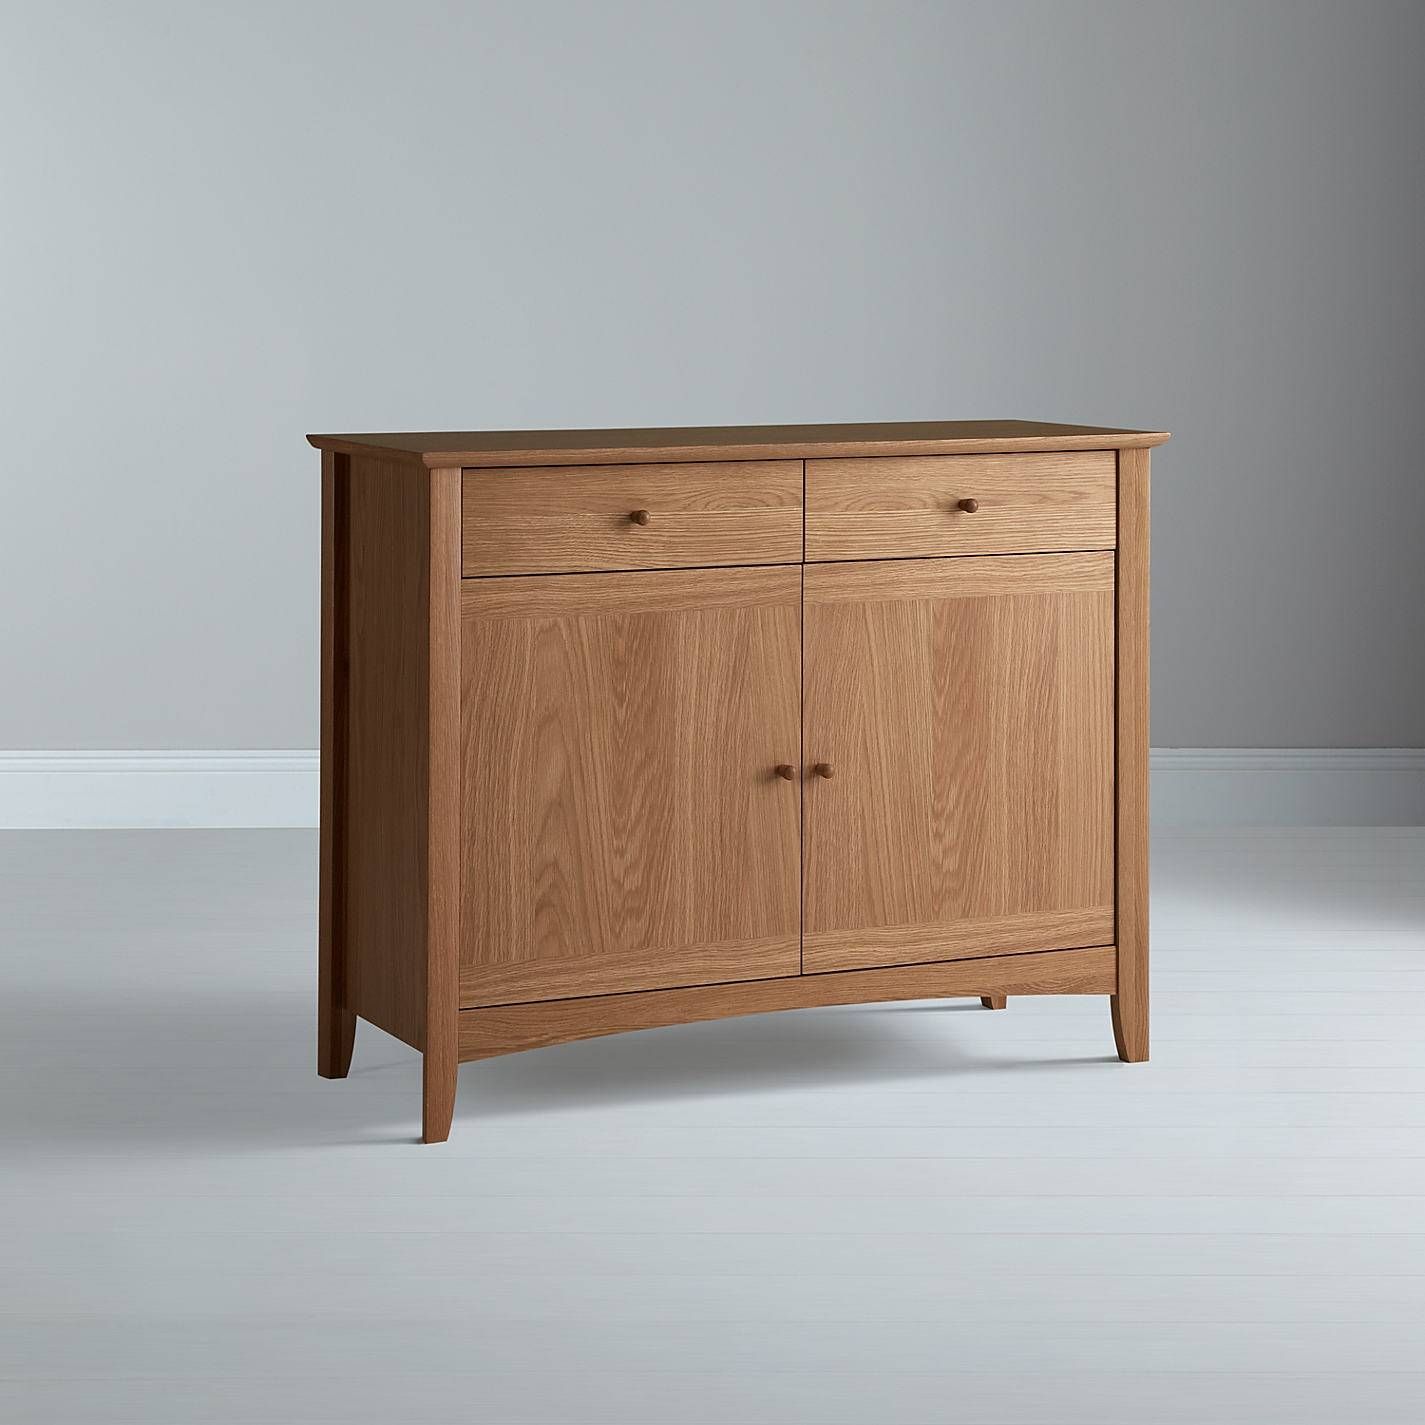 Sideboards: Extraodinary Narrow Sideboard 12" Sideboard, Shallow Pertaining To Narrow Oak Sideboards (View 10 of 30)